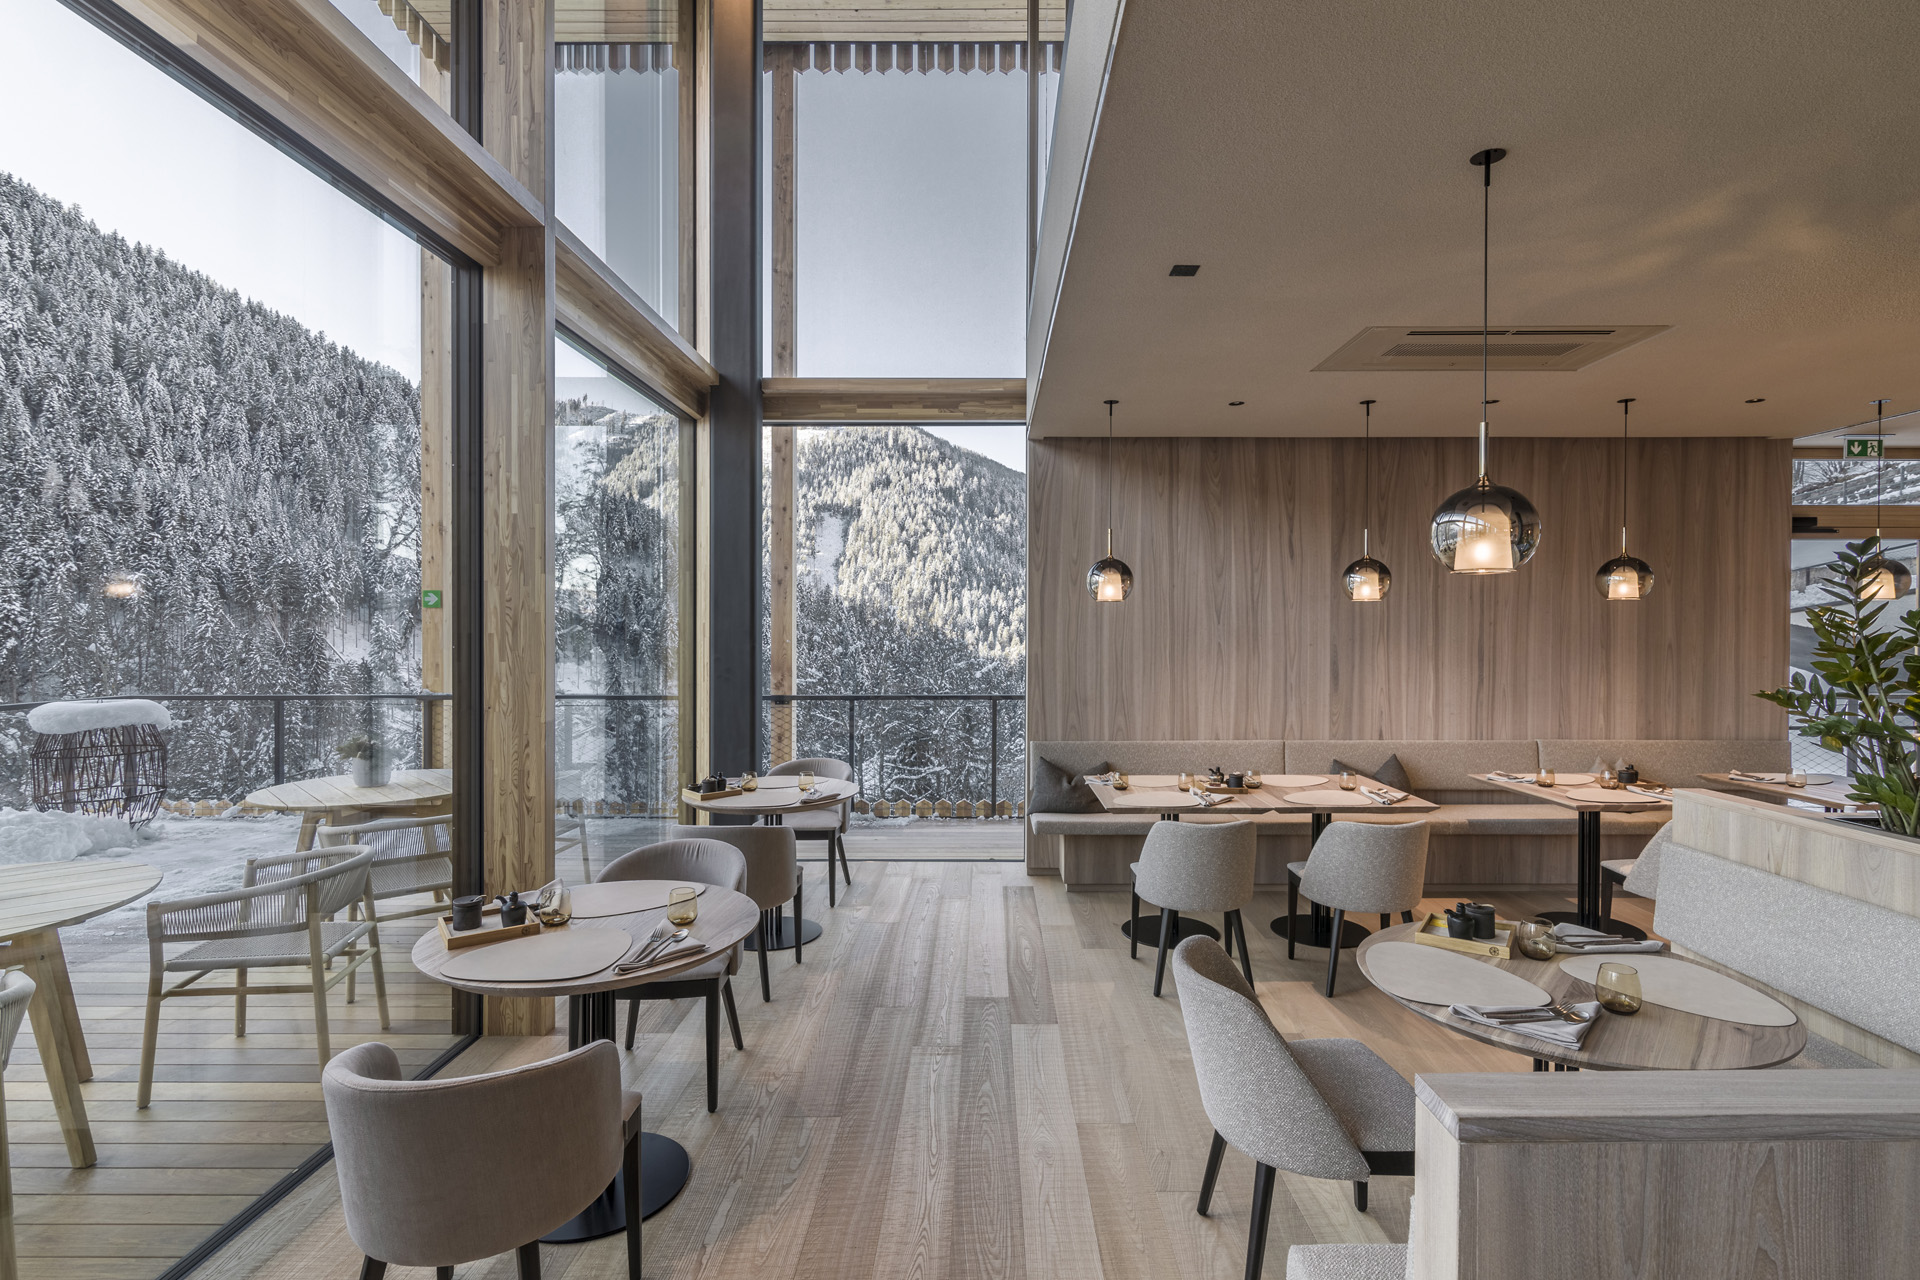 The restaurant with views over the Dolomites